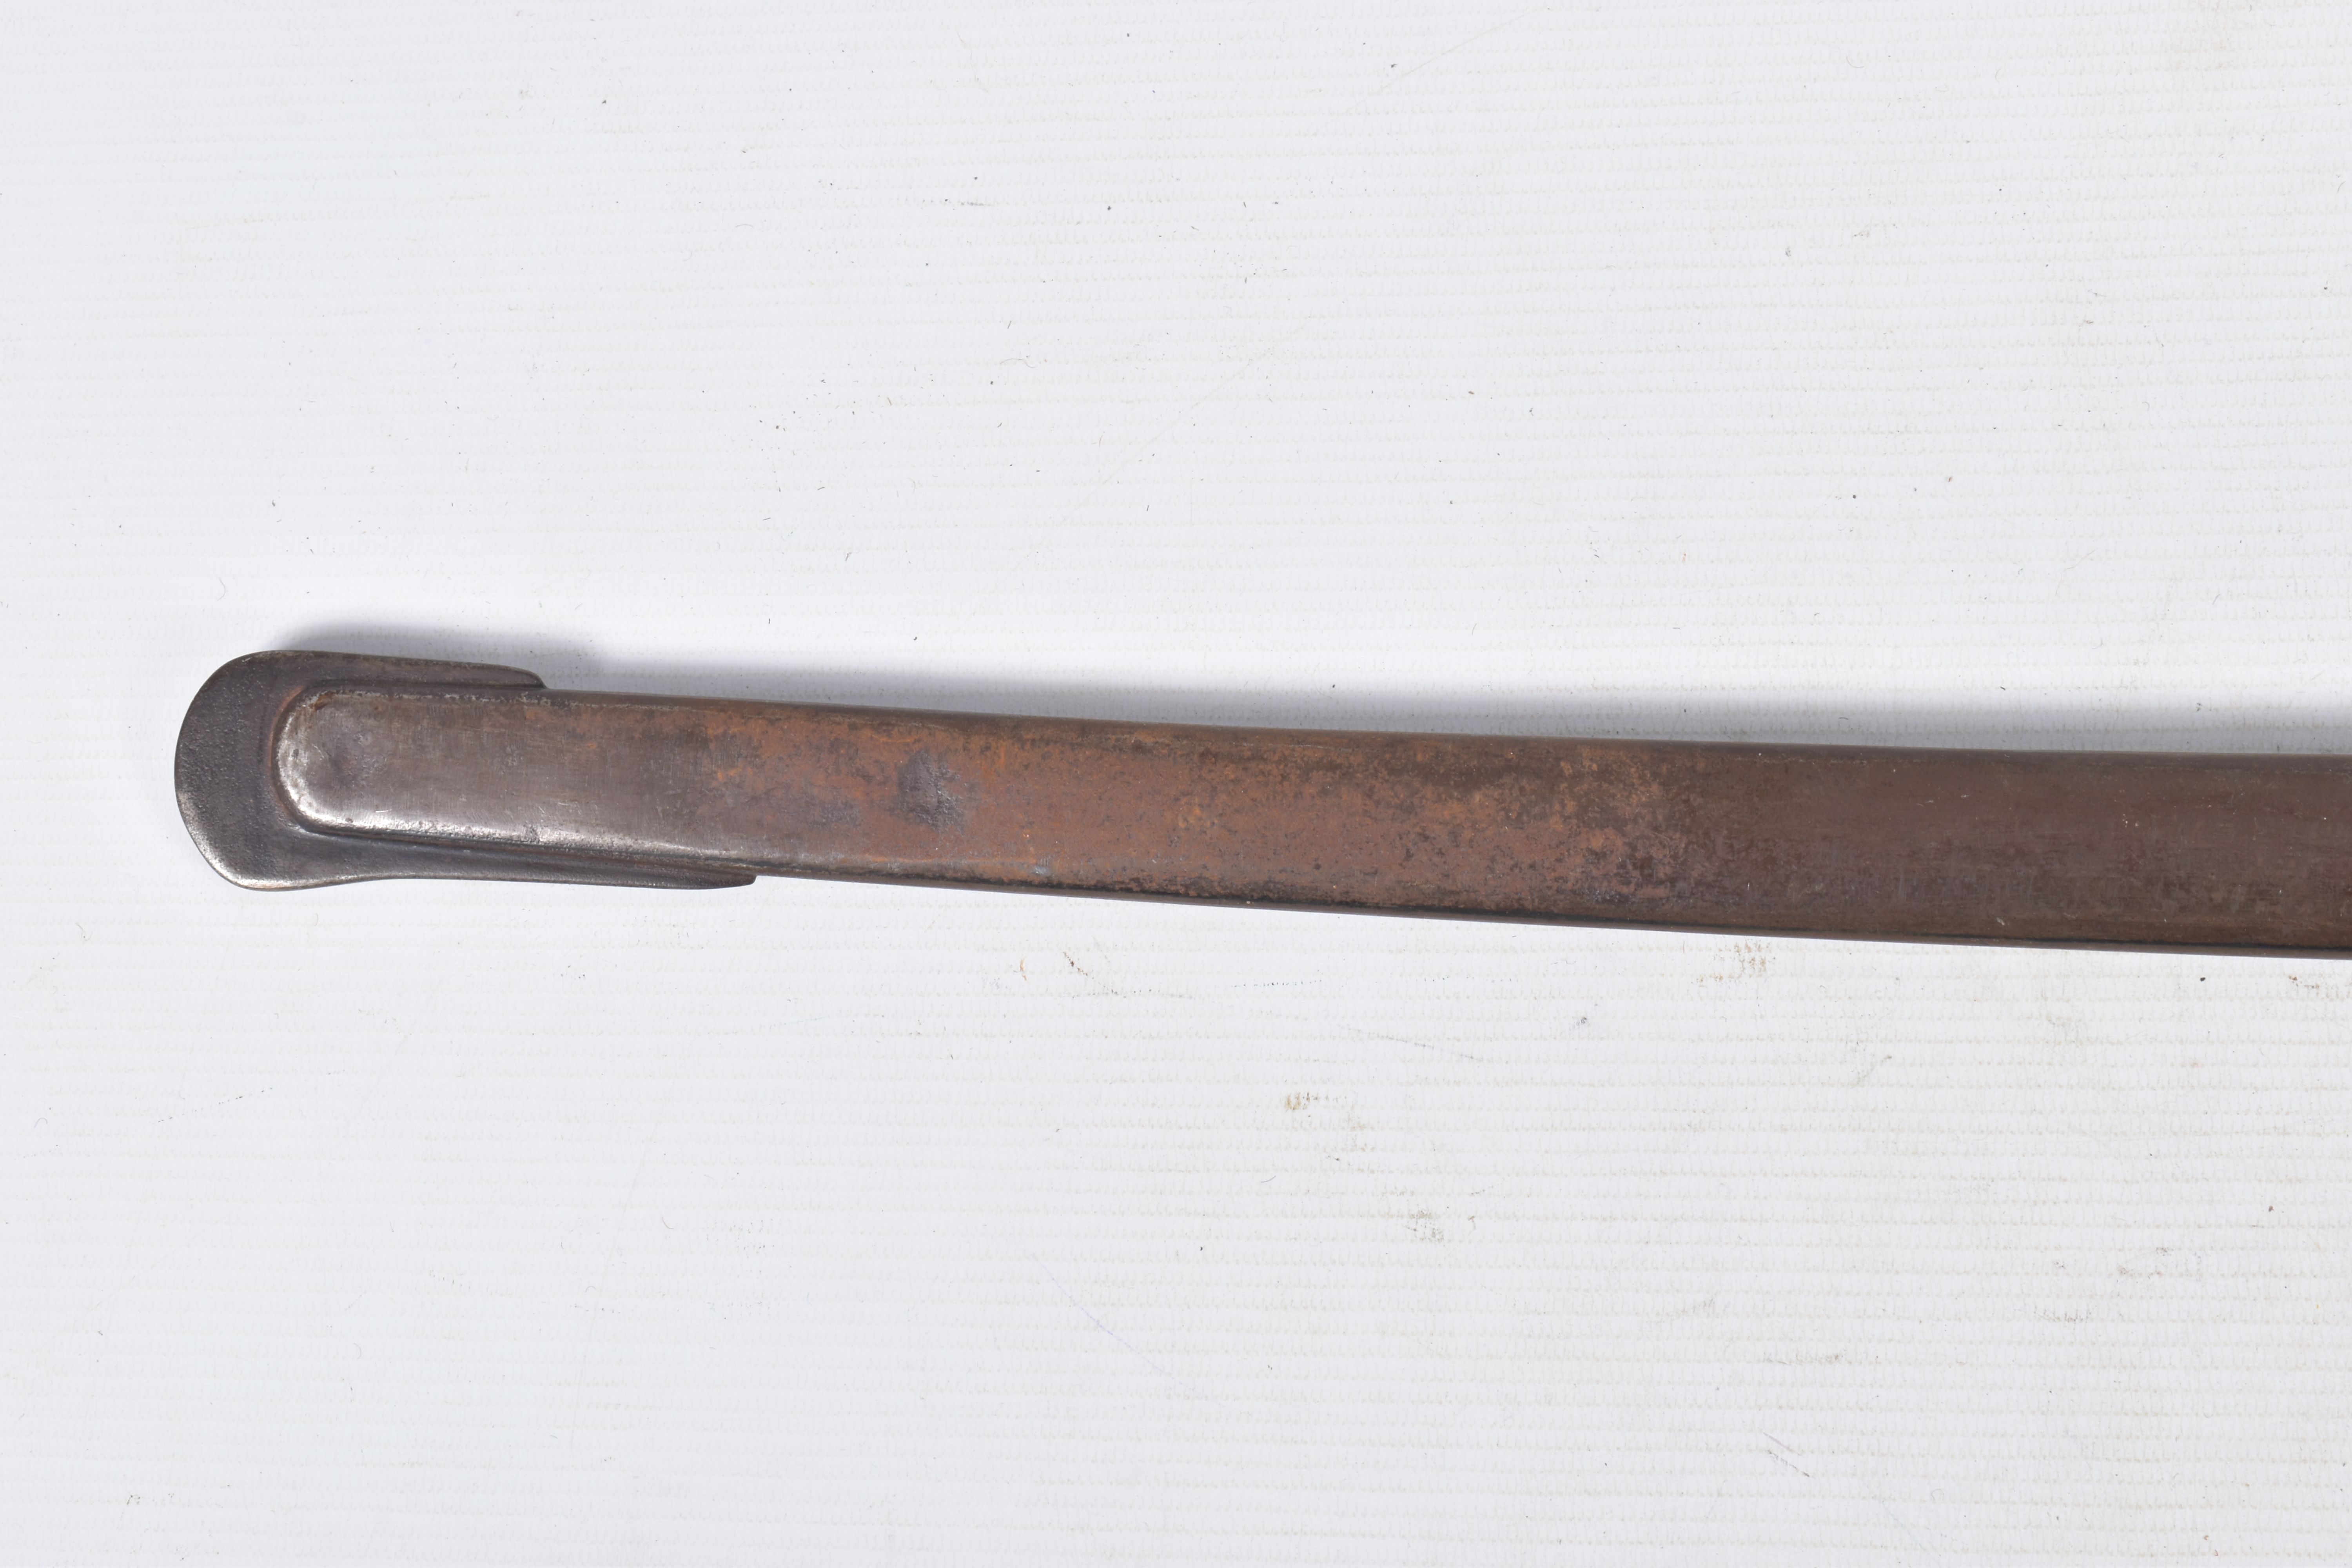 A JAPANESE TYPE 32 OTSU SABRE, the blade has no markings but has the serial number 60866 at the - Image 7 of 29